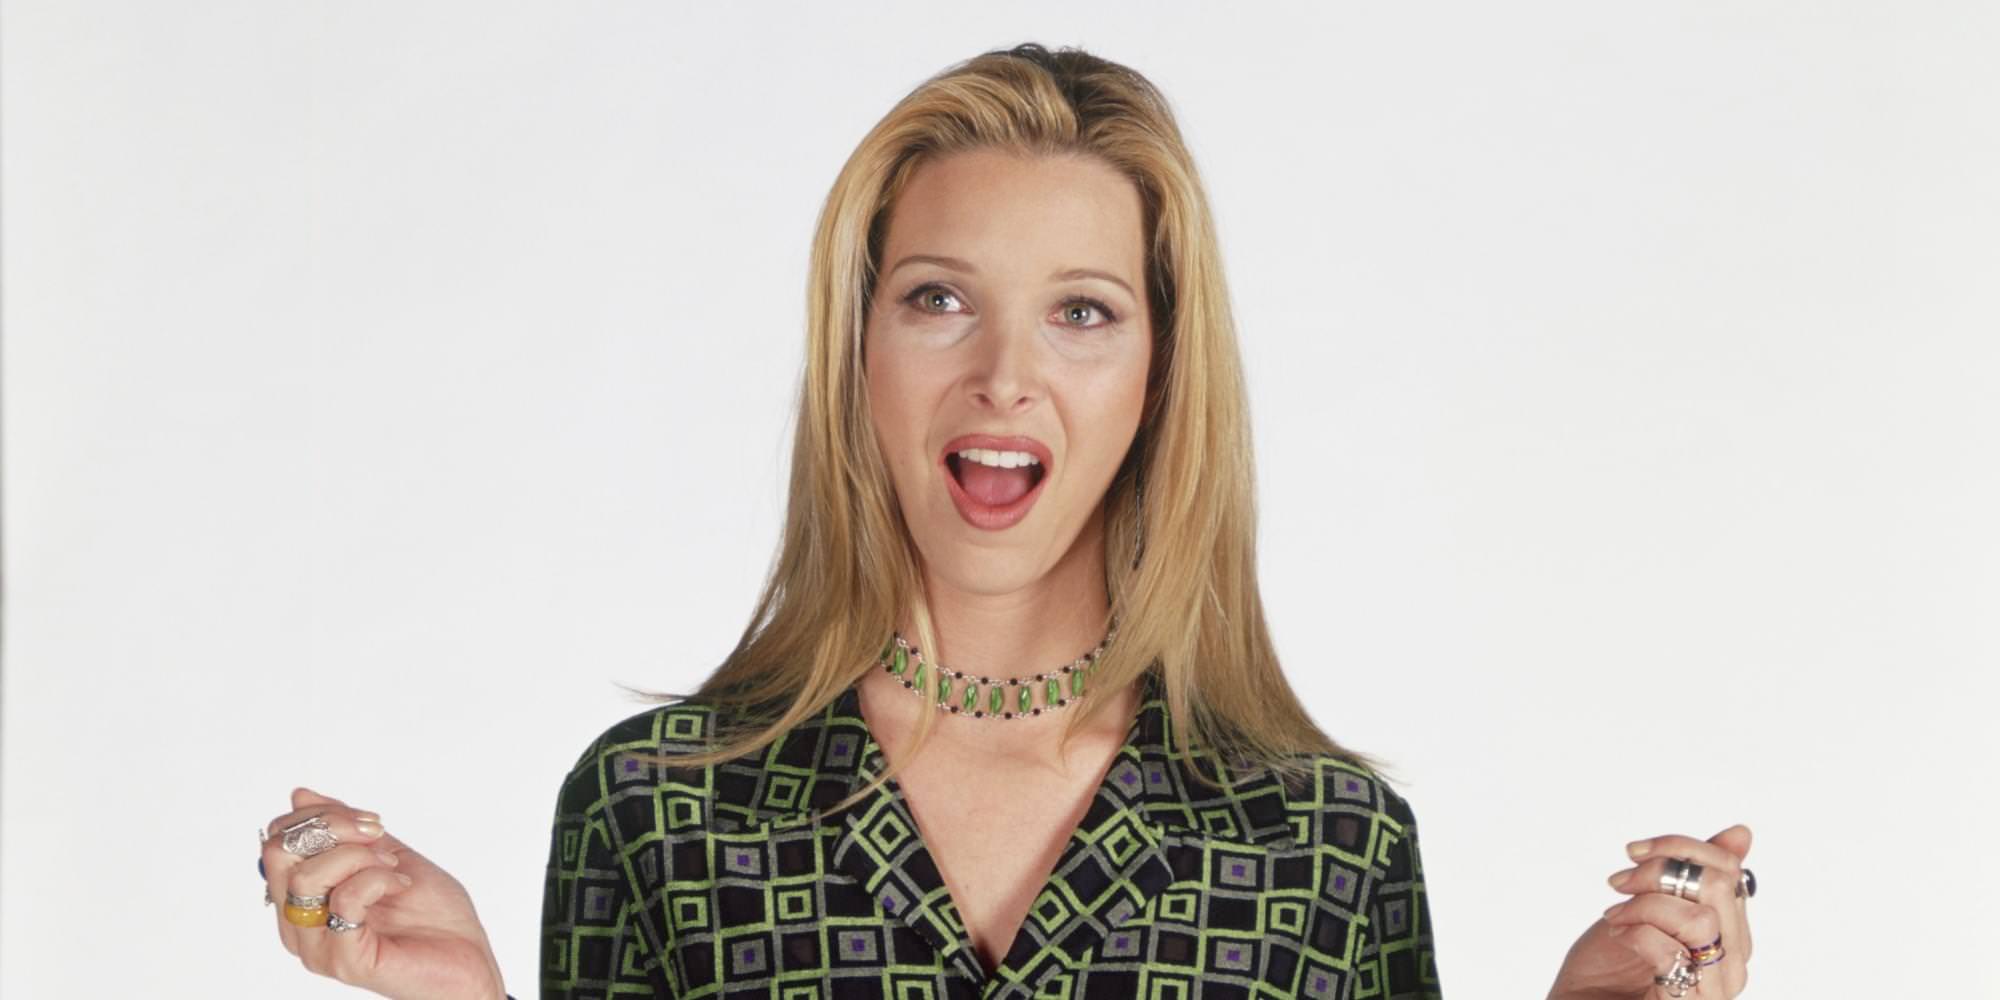 18 Qualities You Need to Be a True Friend – As Told by Phoebe Buffay